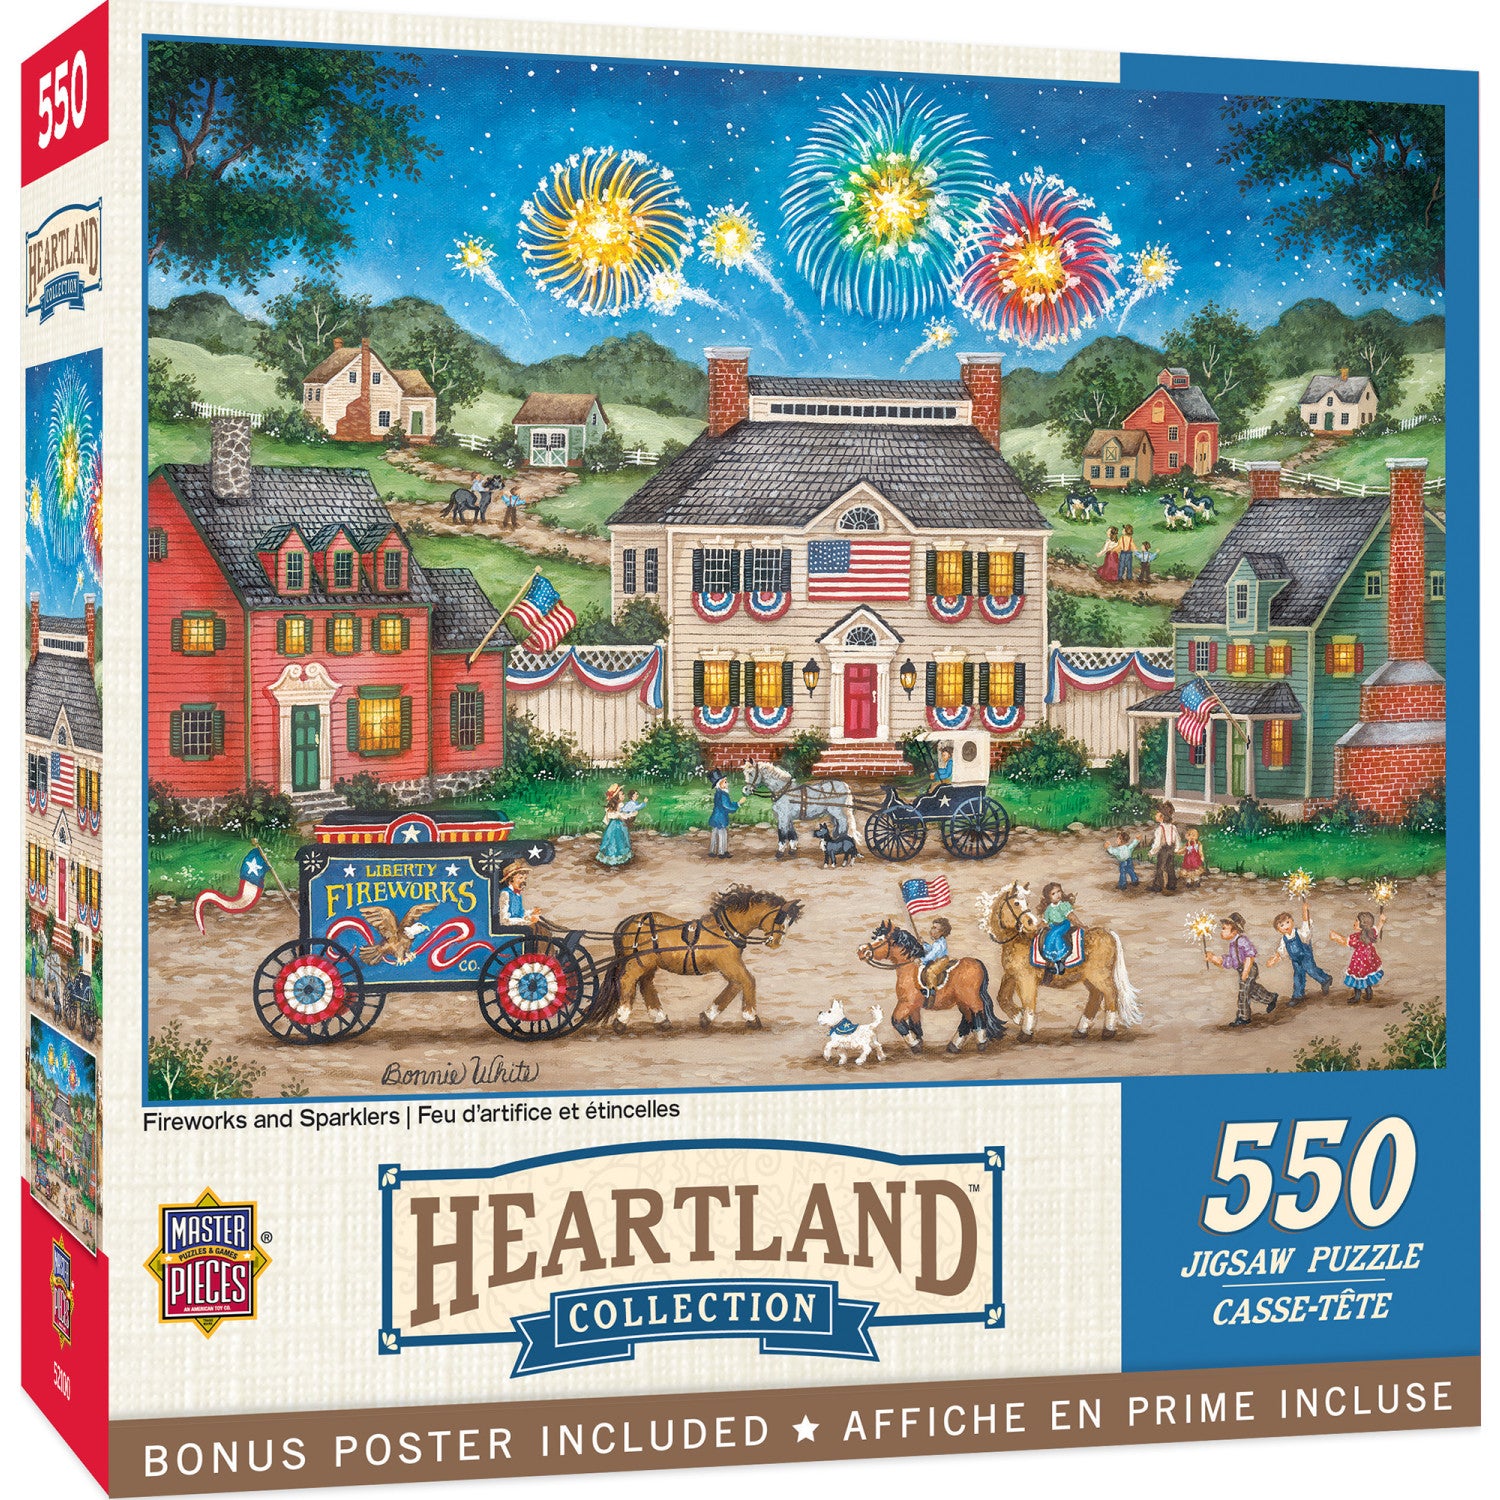 Heartland - Fireworks and Sparklers 550 Piece Jigsaw Puzzle